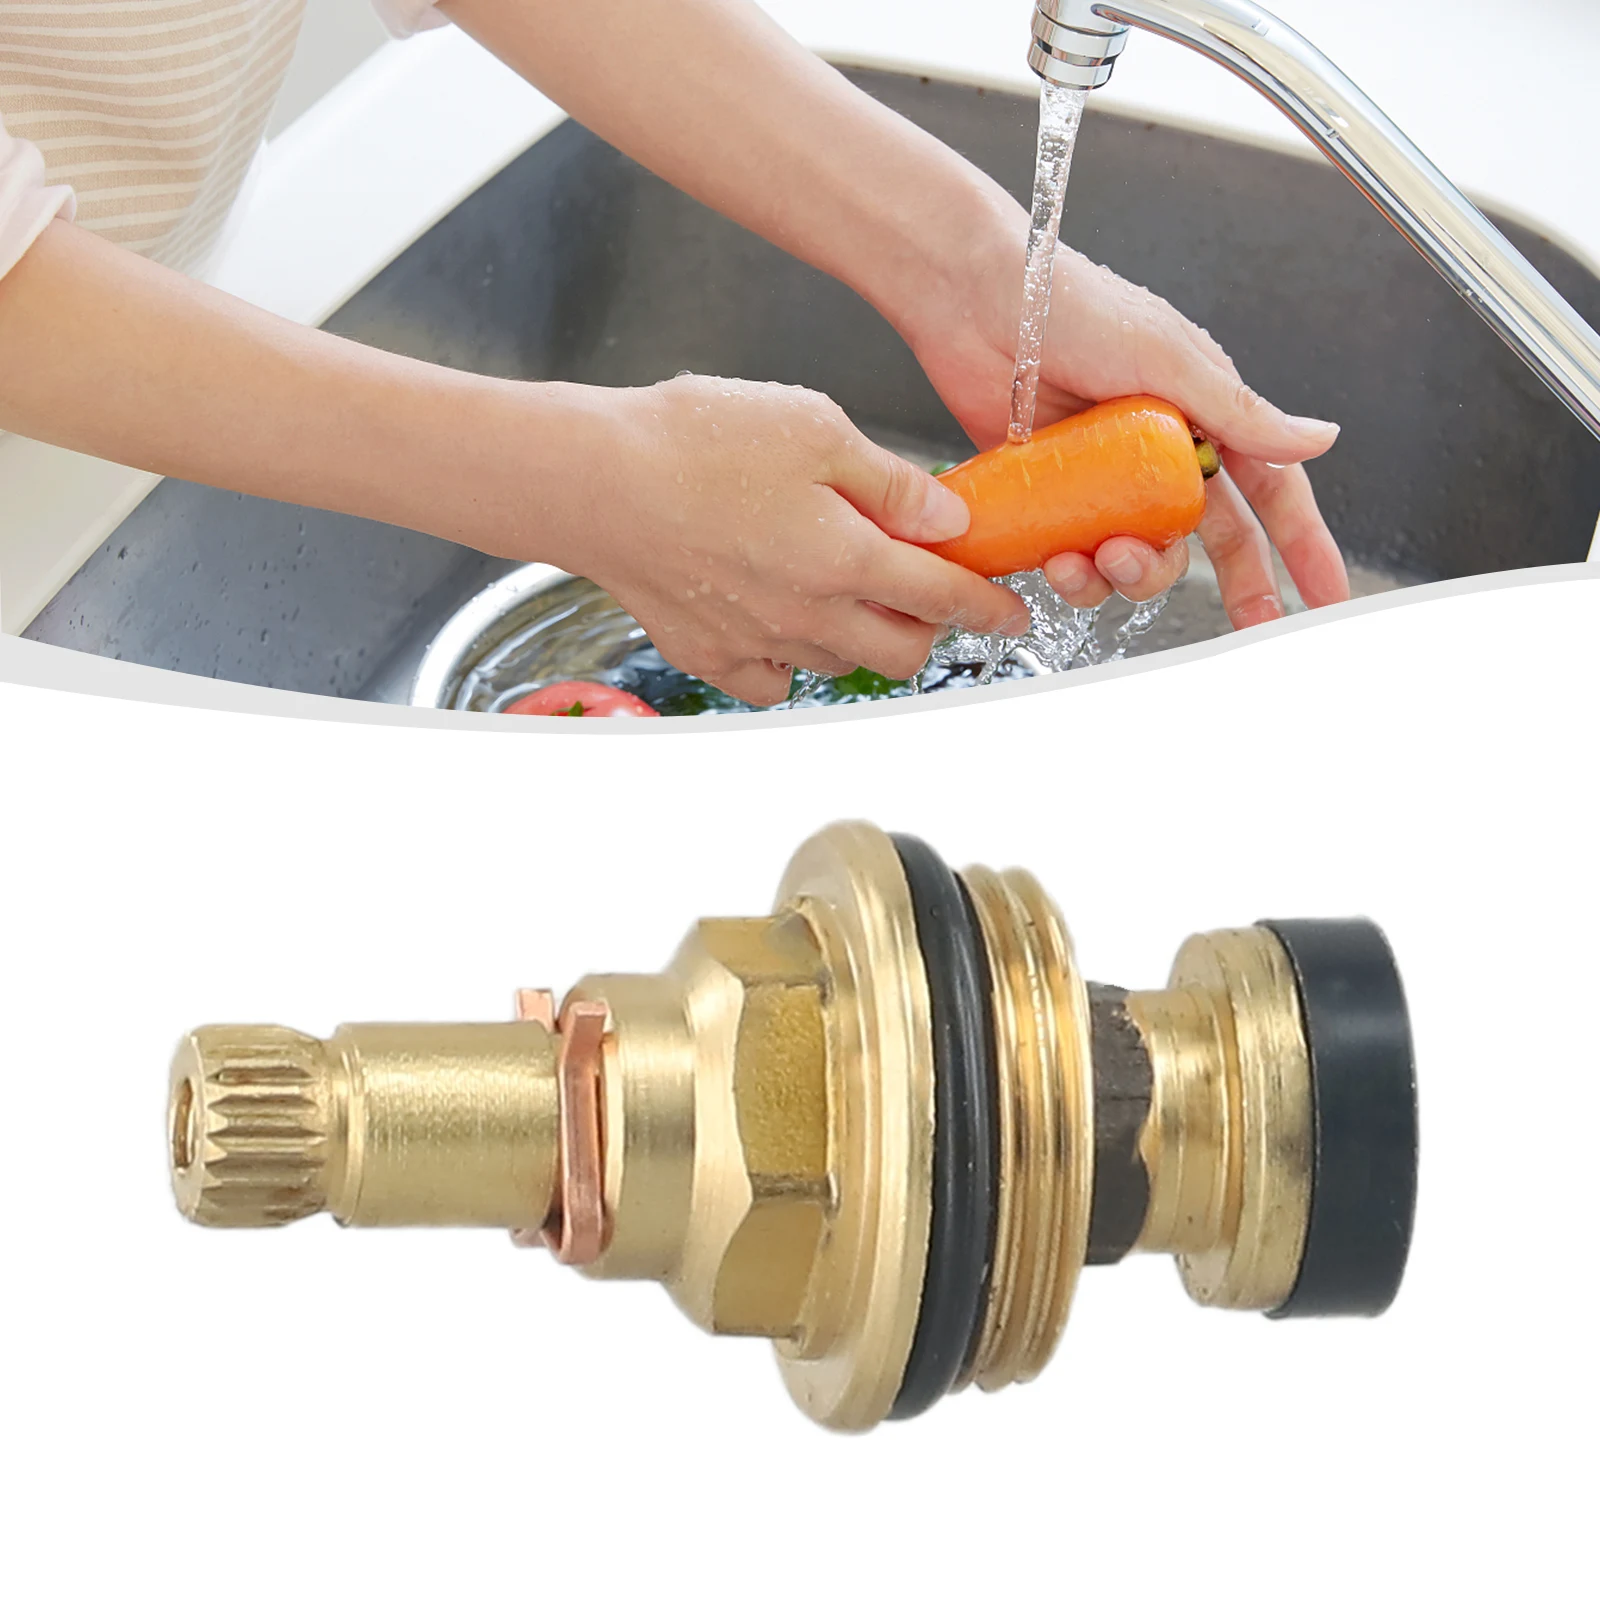 Brass Slow Opening Spool Faucet Hot And Cold Water Spool G1/2 Bsp 20 Tooth With Rubber Retaining Gasket Opening Valve Core